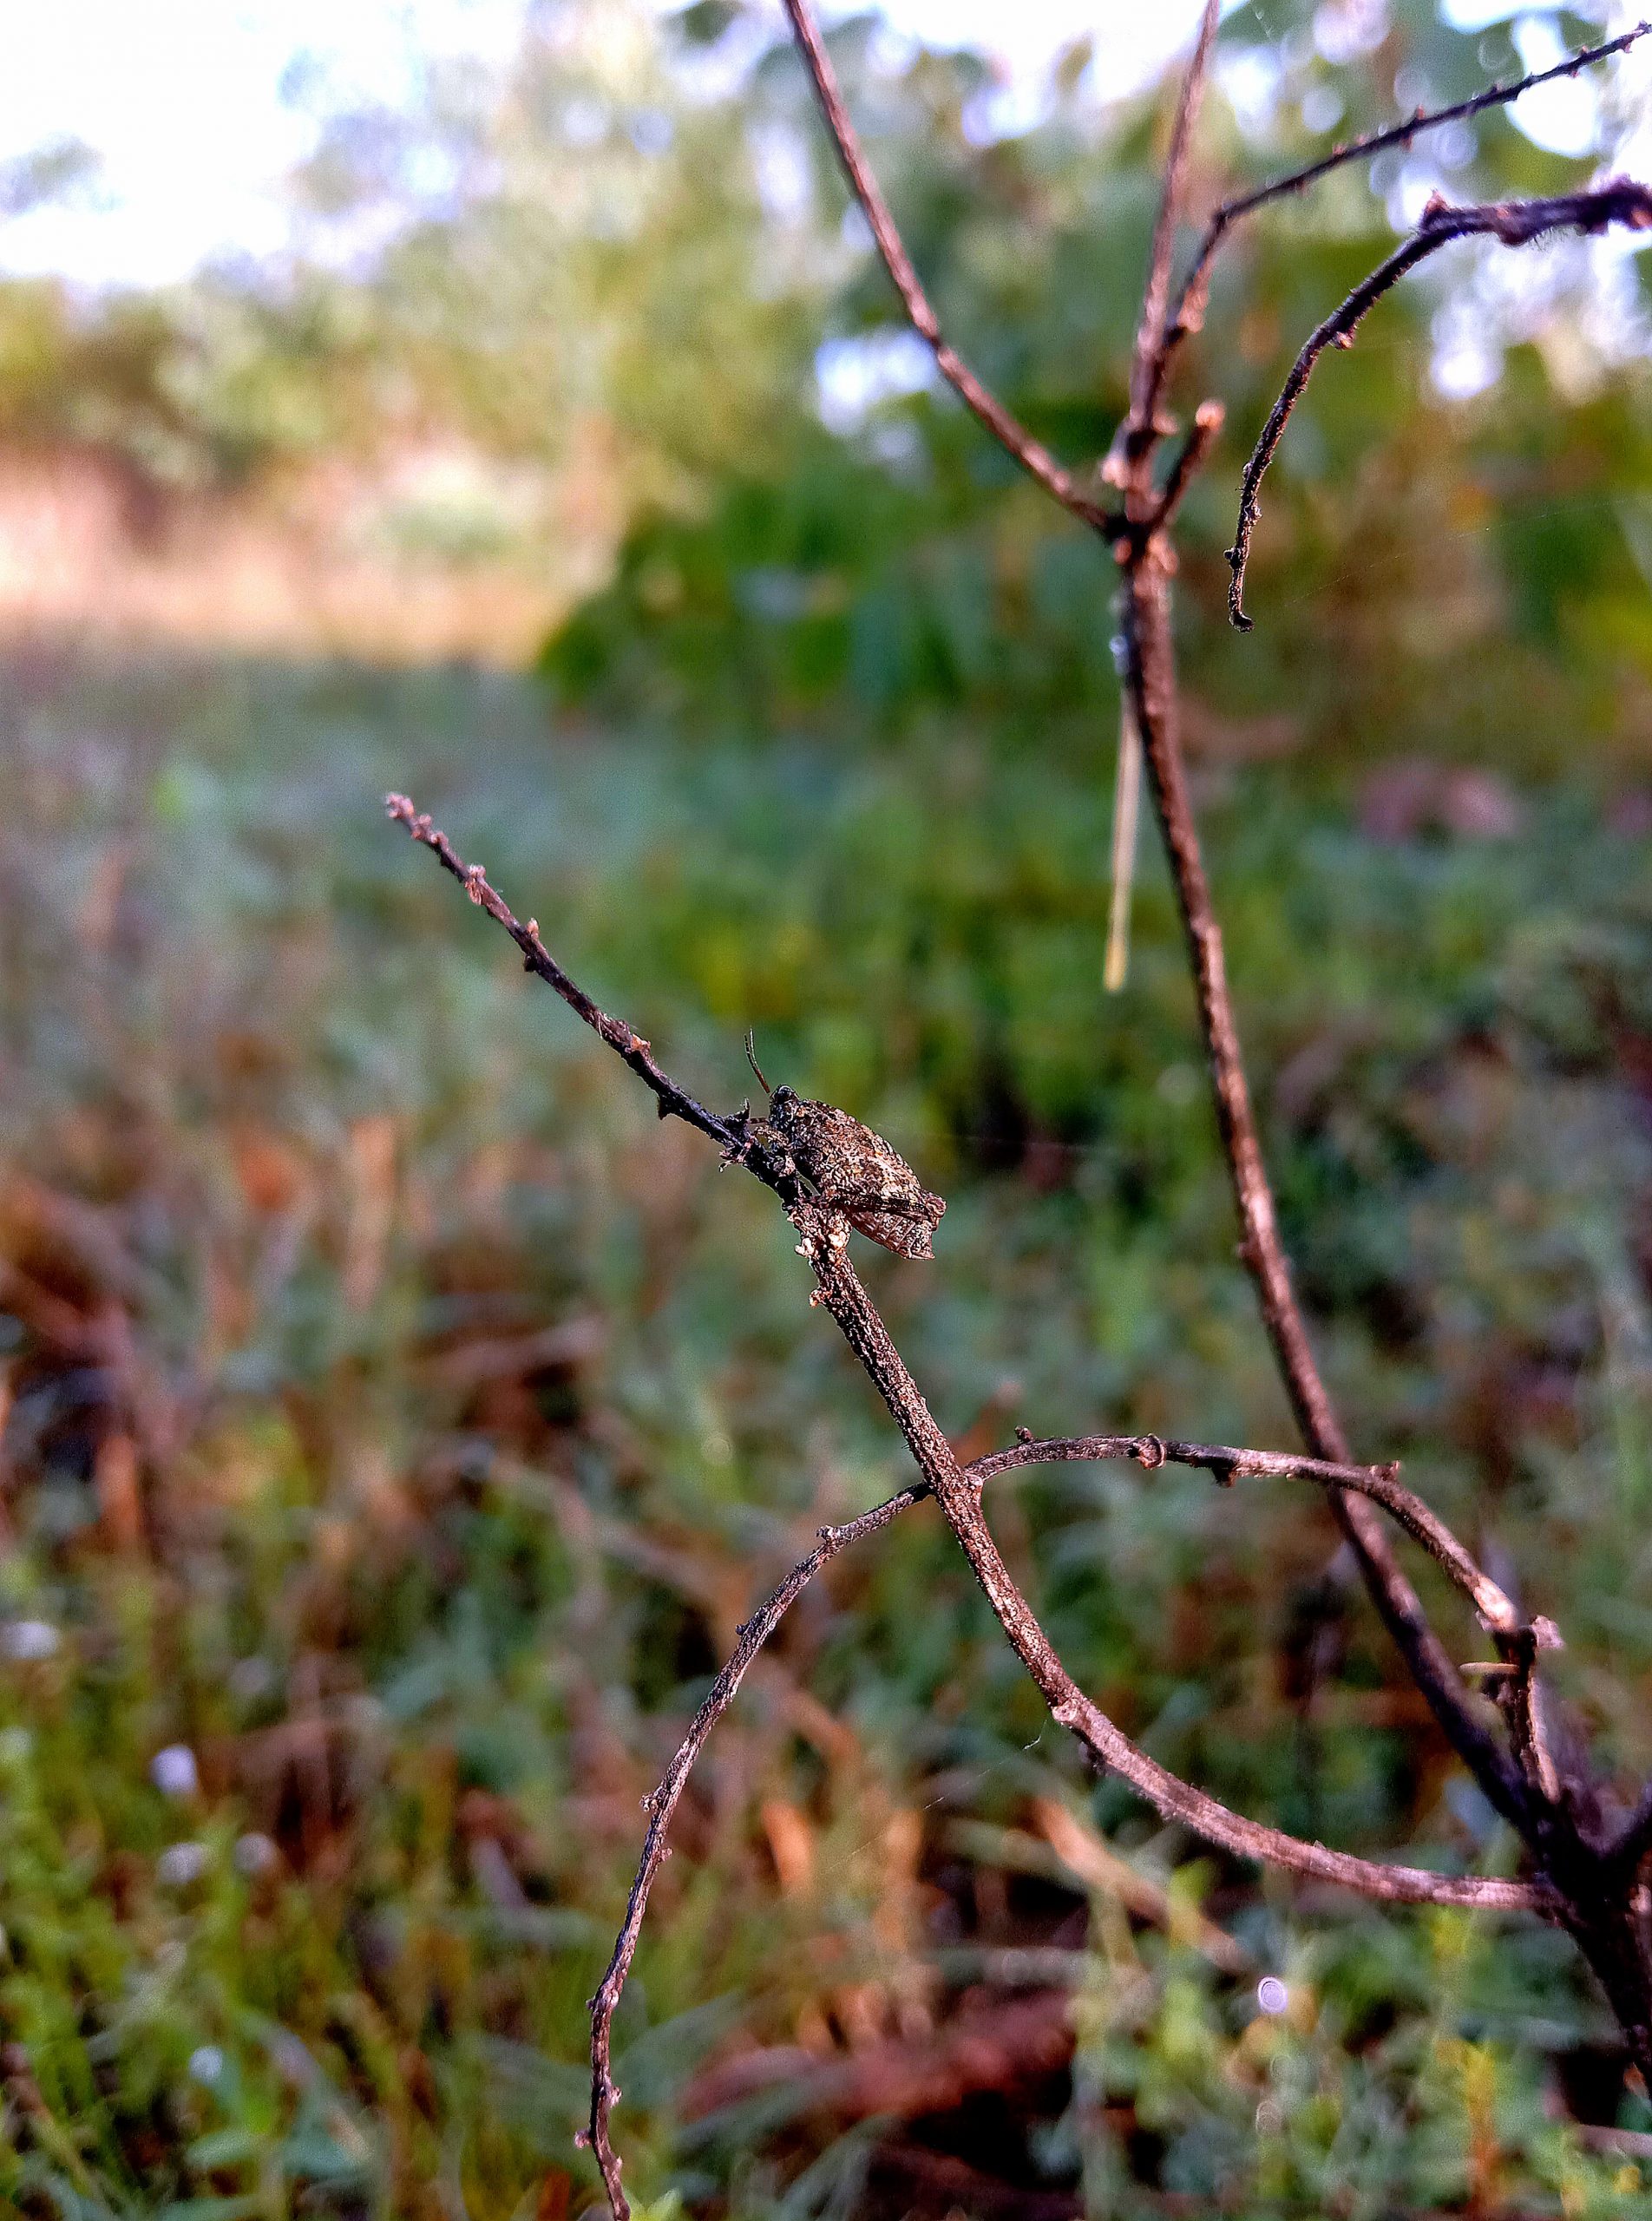 Insect sitting on branch of plant